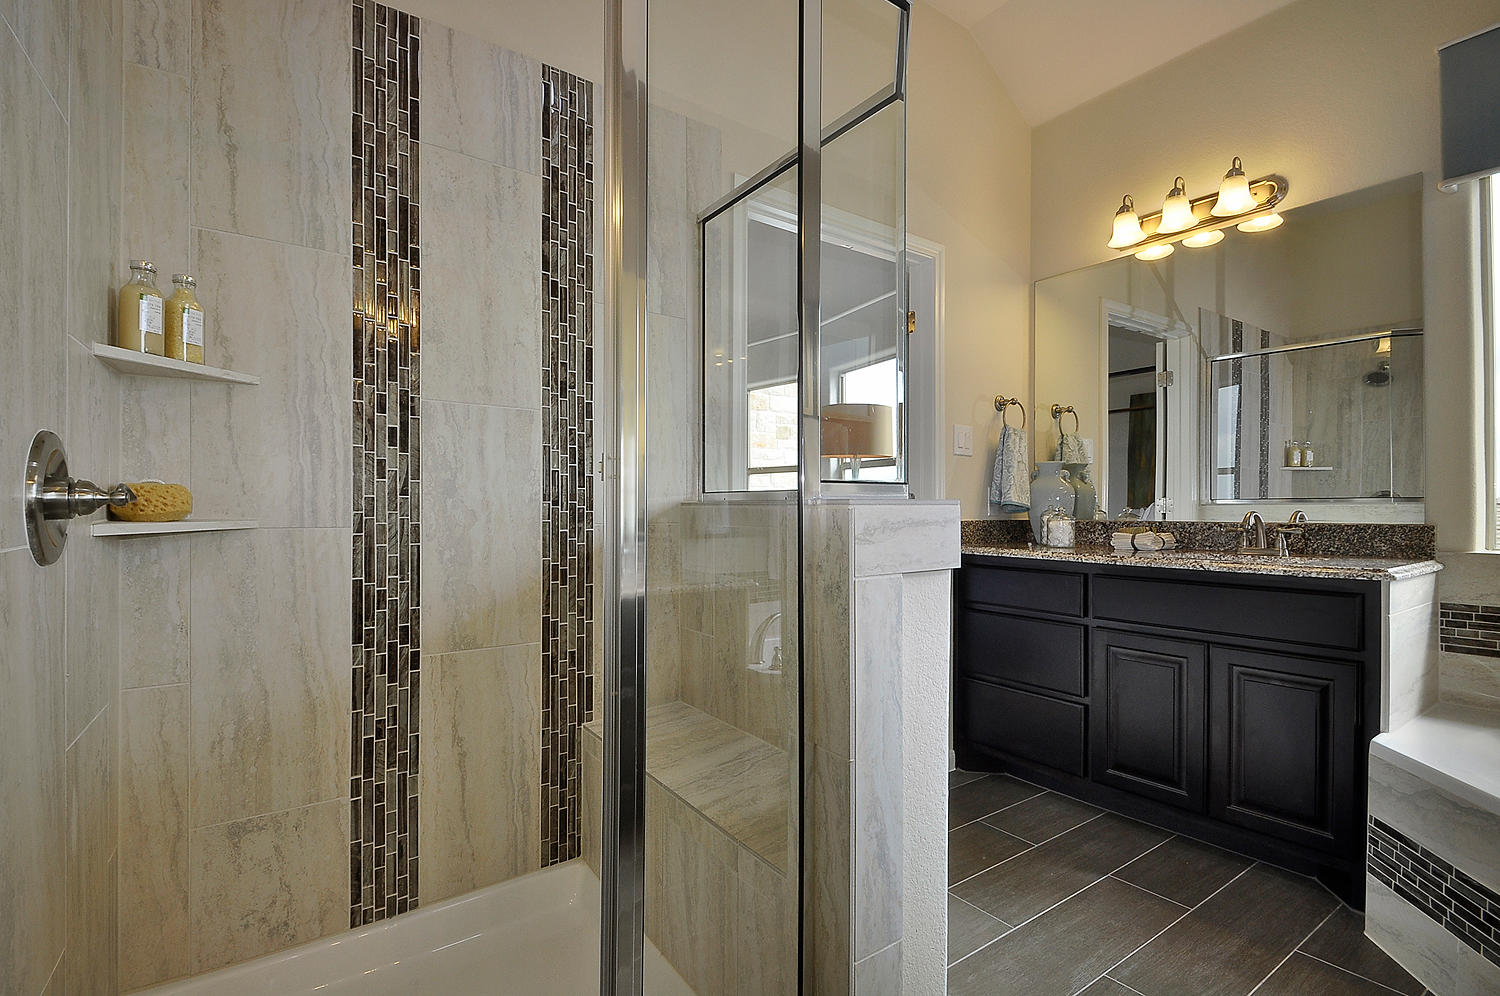 Burrows Cabinets primary bath vanity in Espresso with glass shower